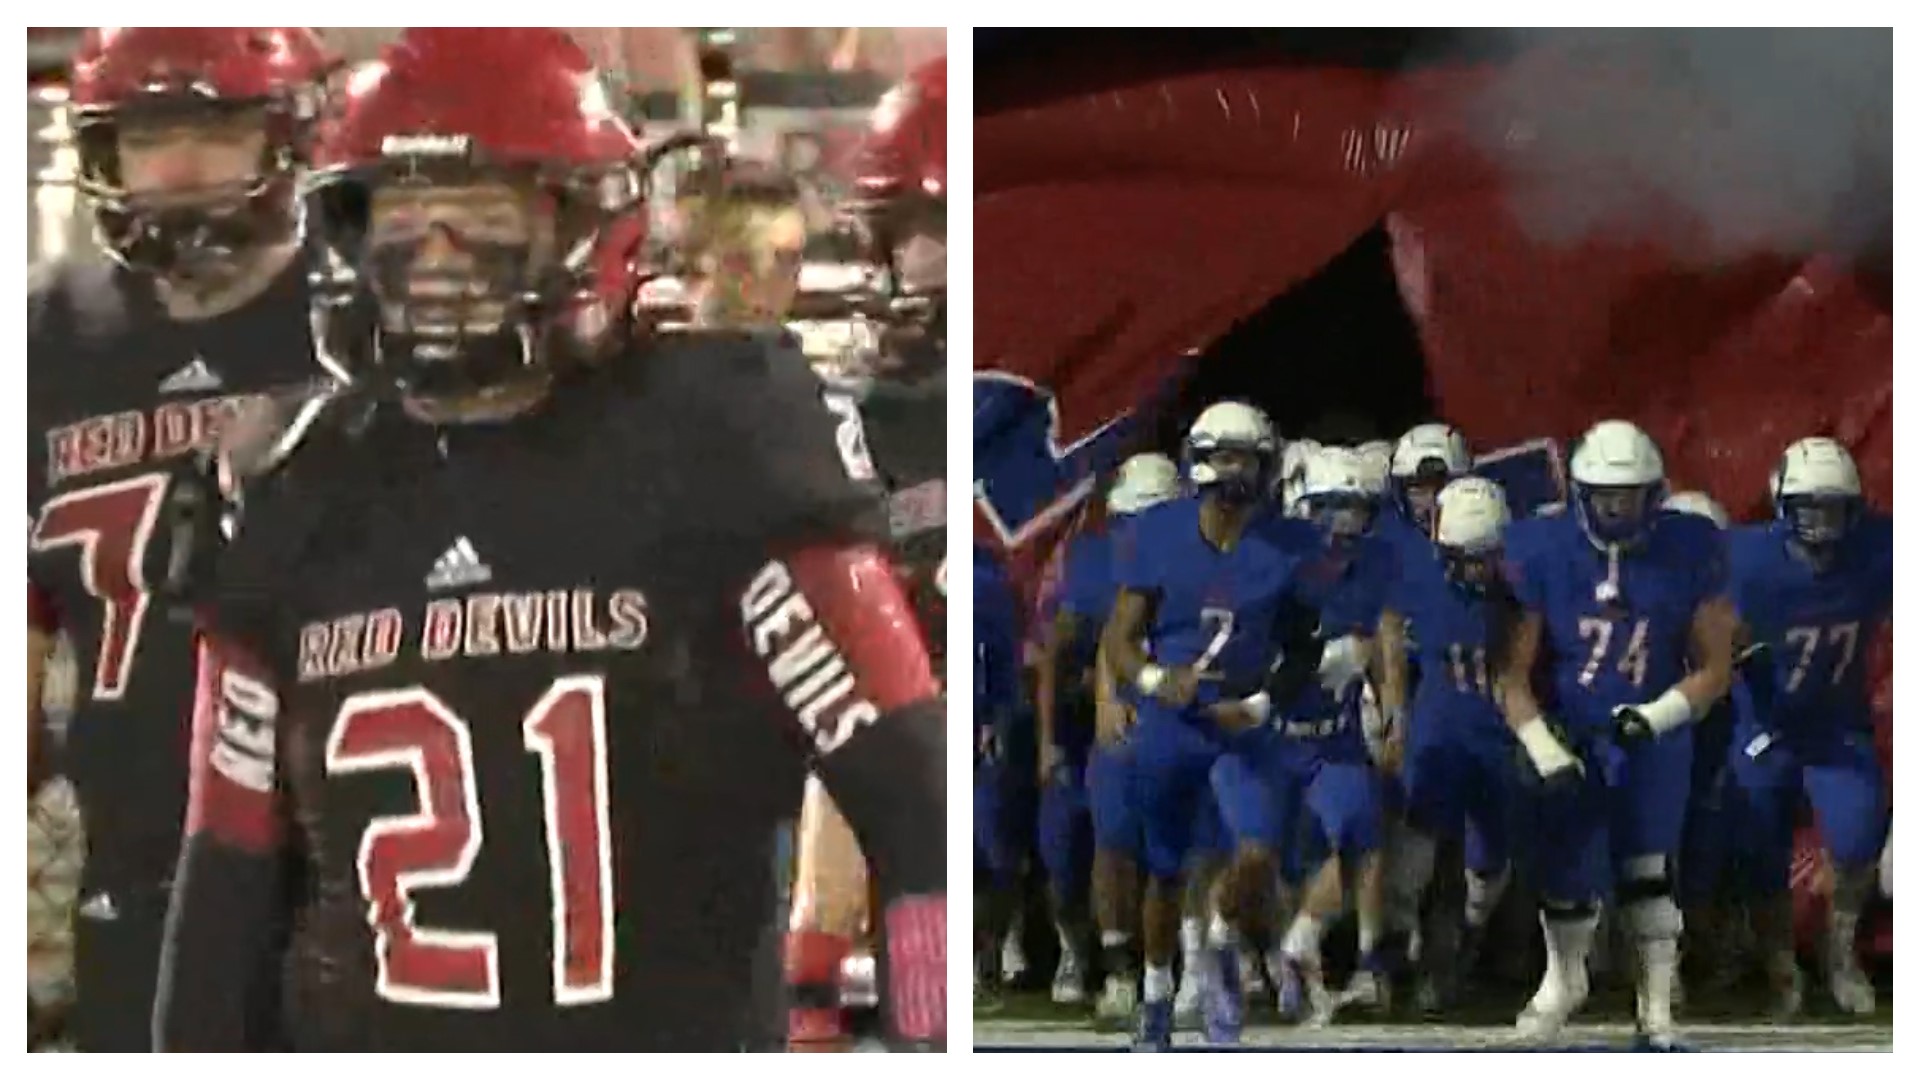 For the third year in a row, Fyffe and Mars Hill will play for a state title in football.